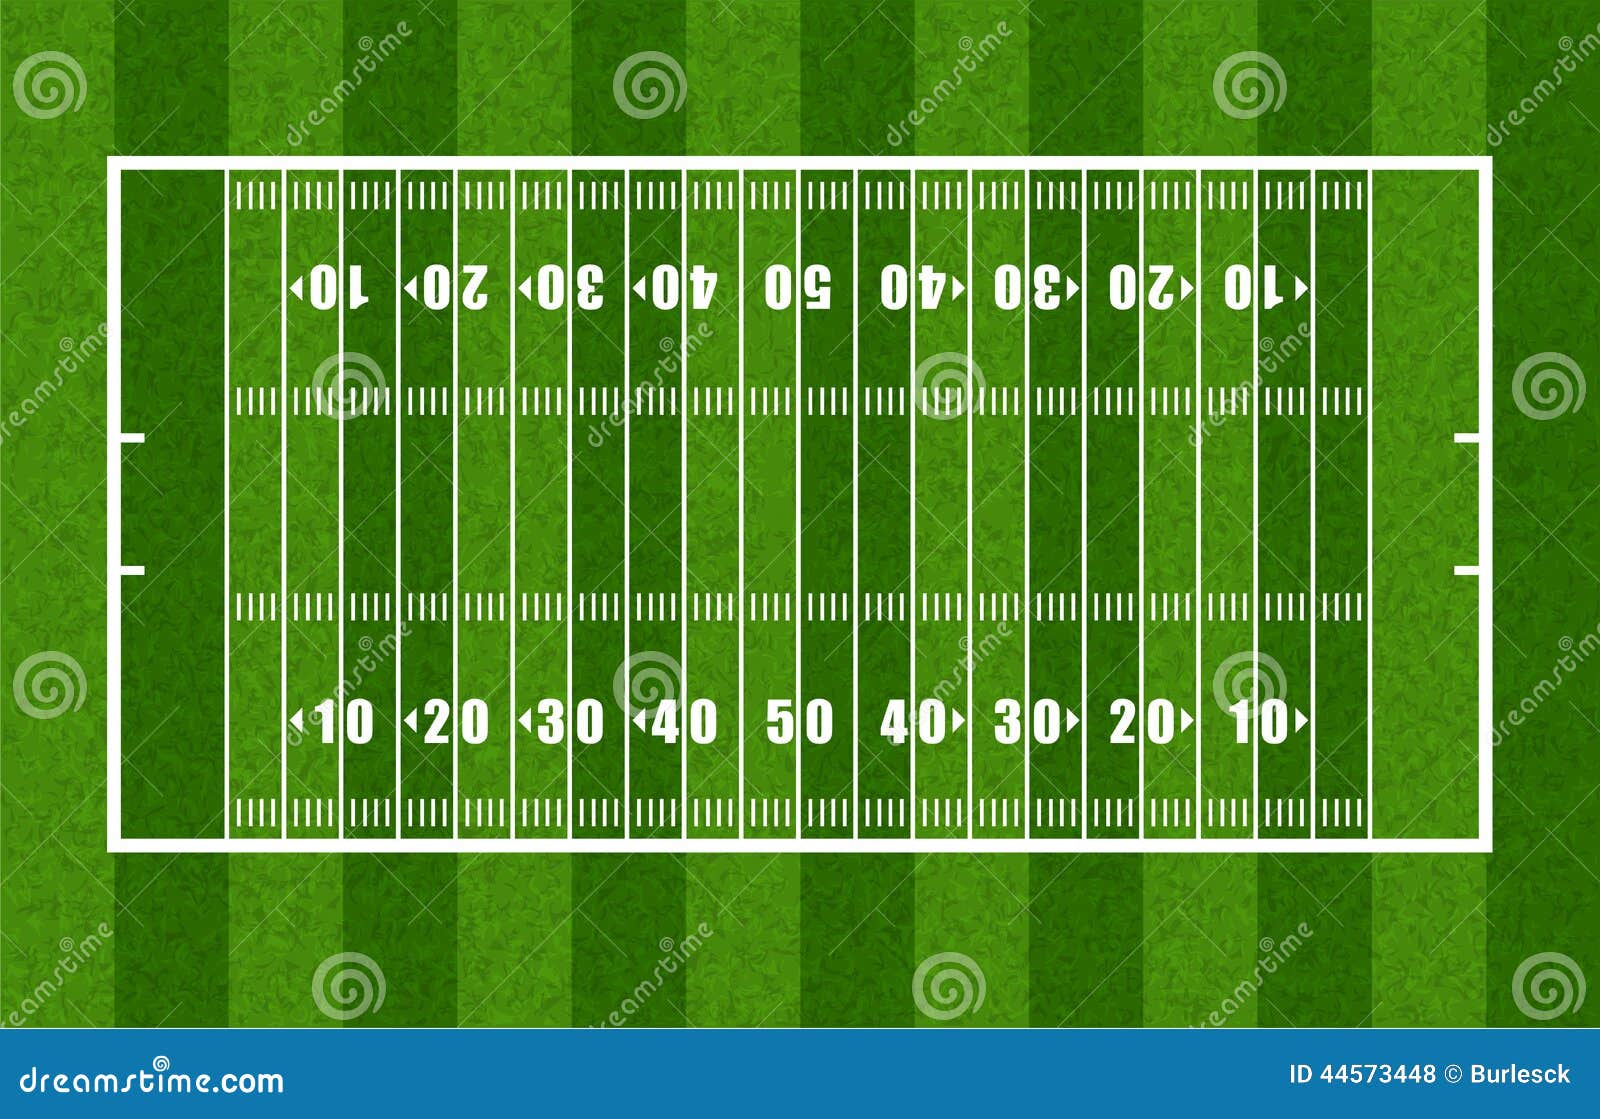 overview of american football field